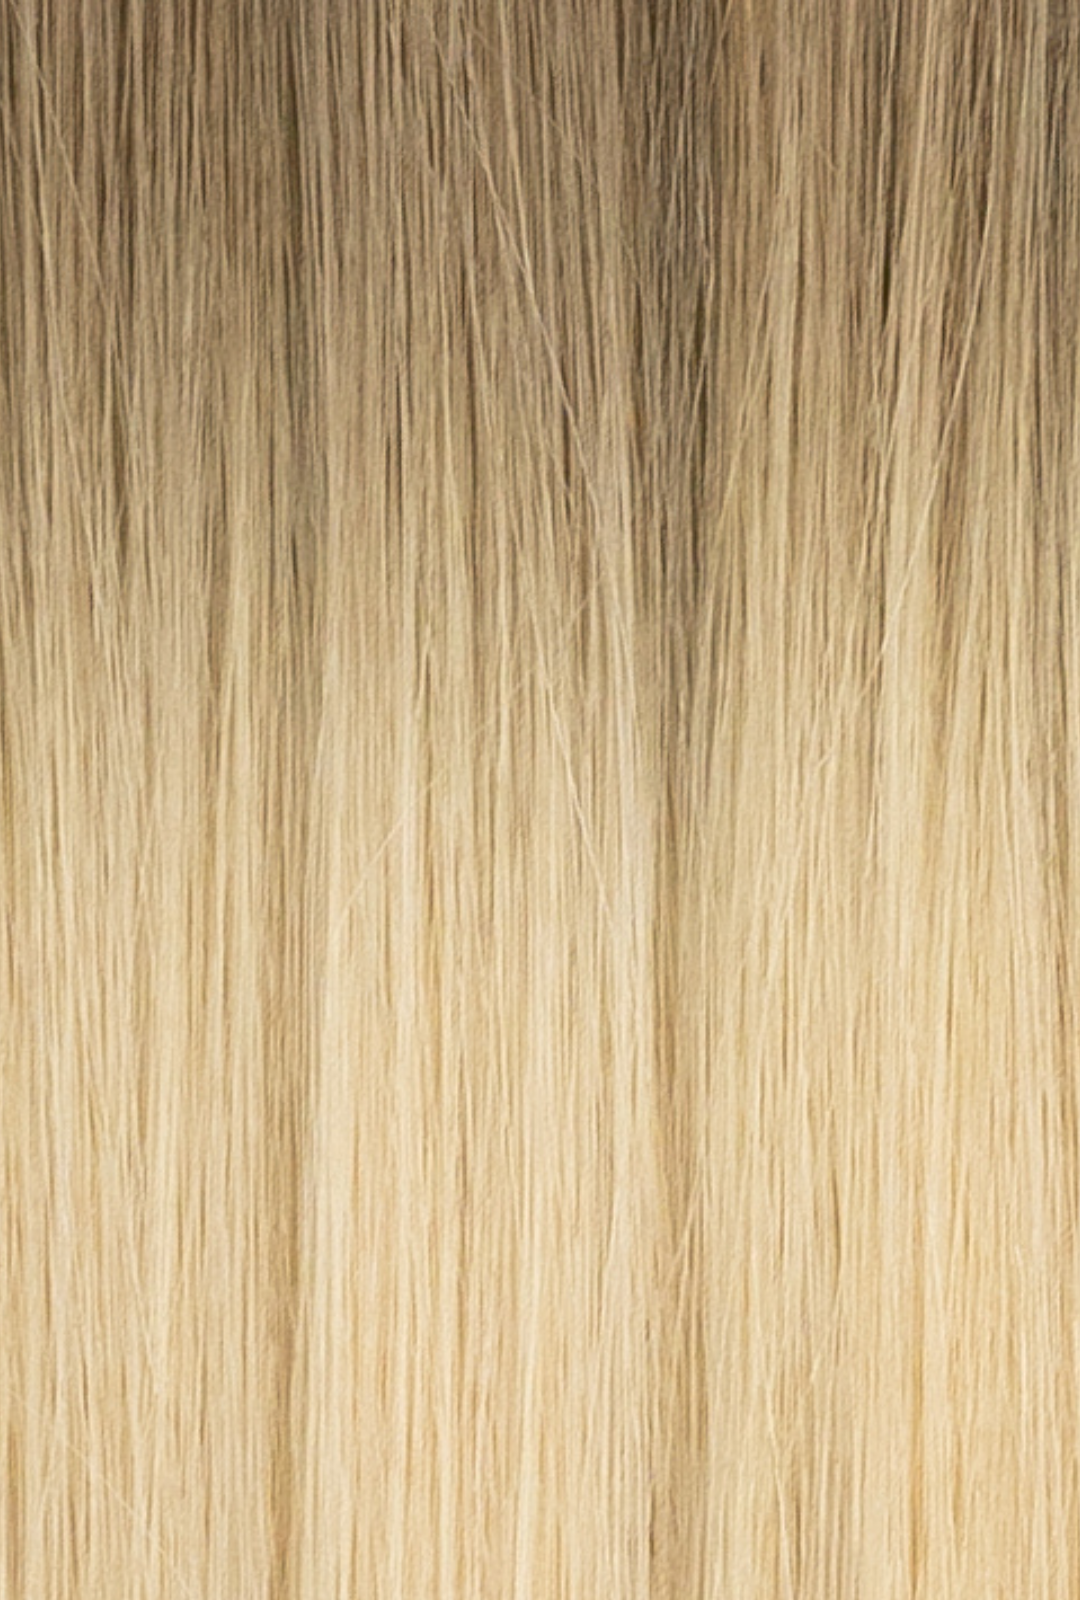 Waved by Laced Hair Machine Sewn Weft Extensions Ombré #8/613